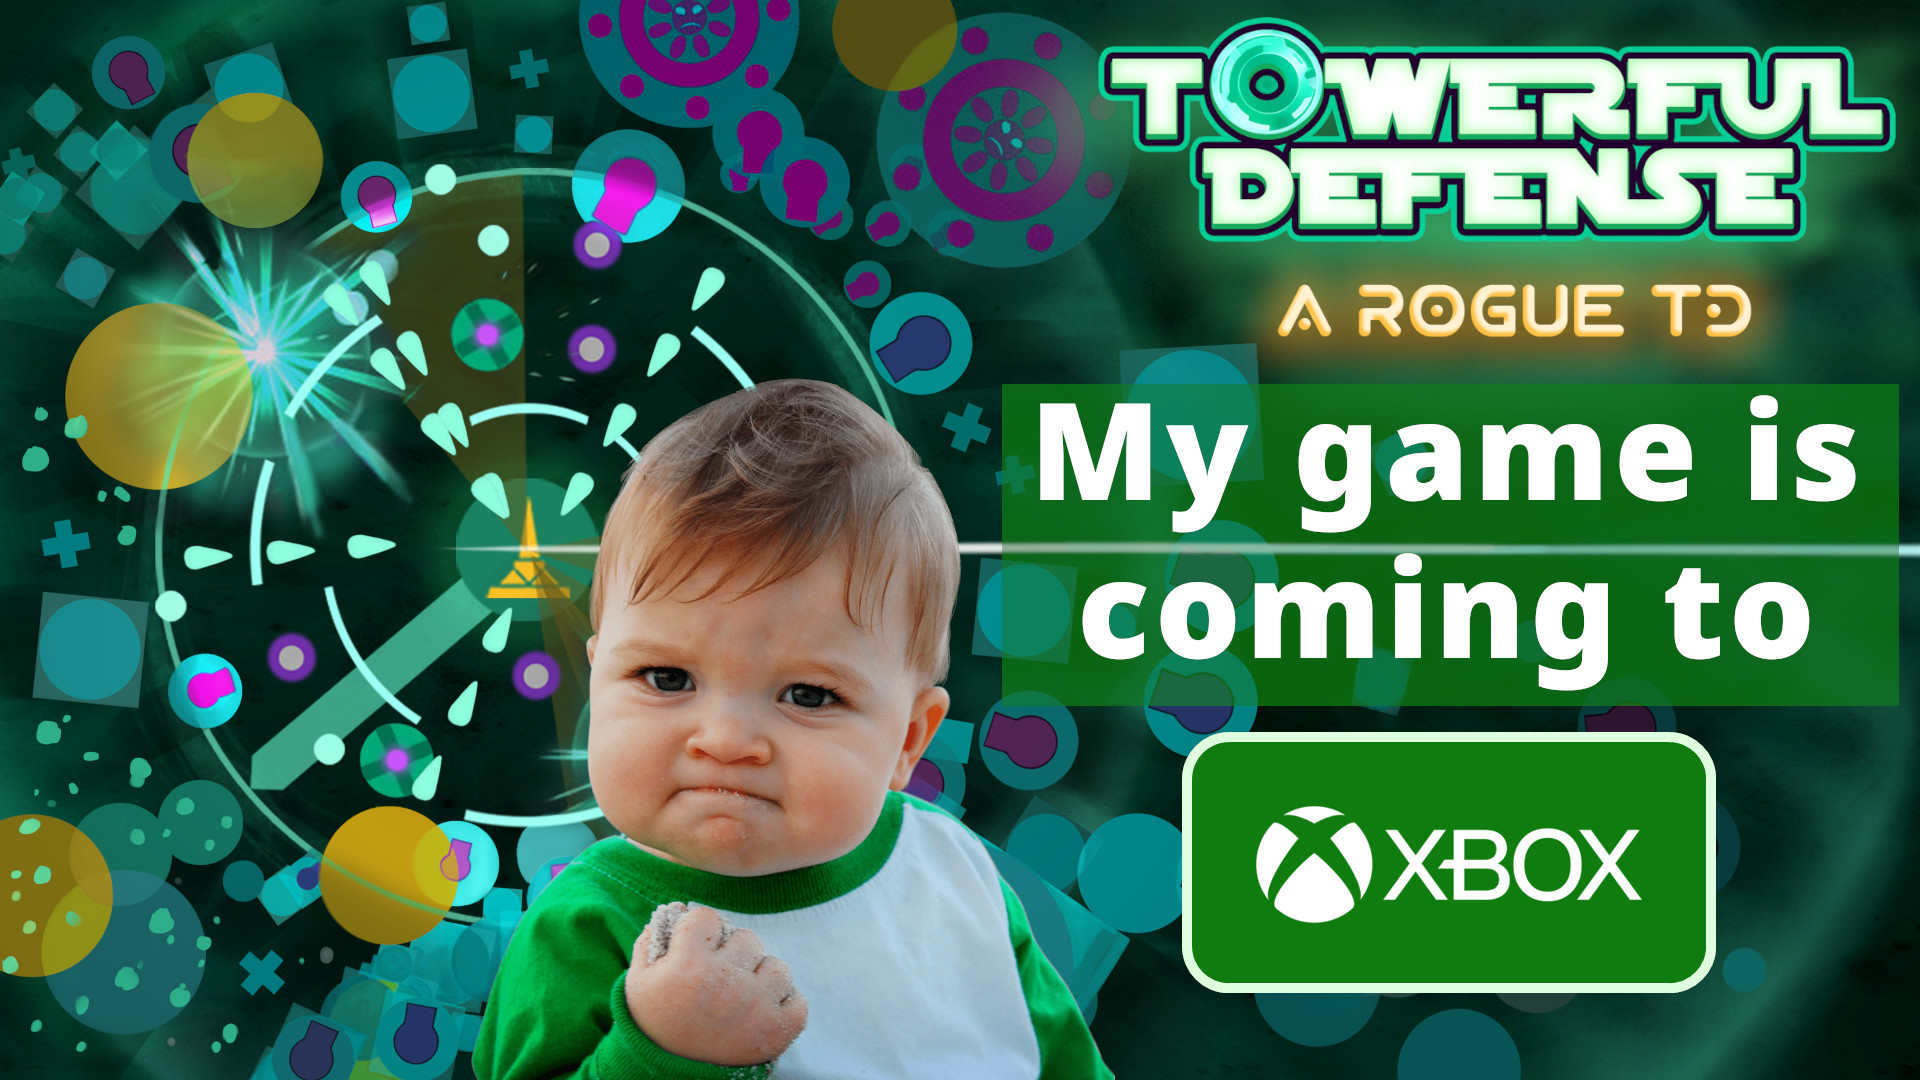 Towerful Defense: A Rogue TD is coming to Xbox